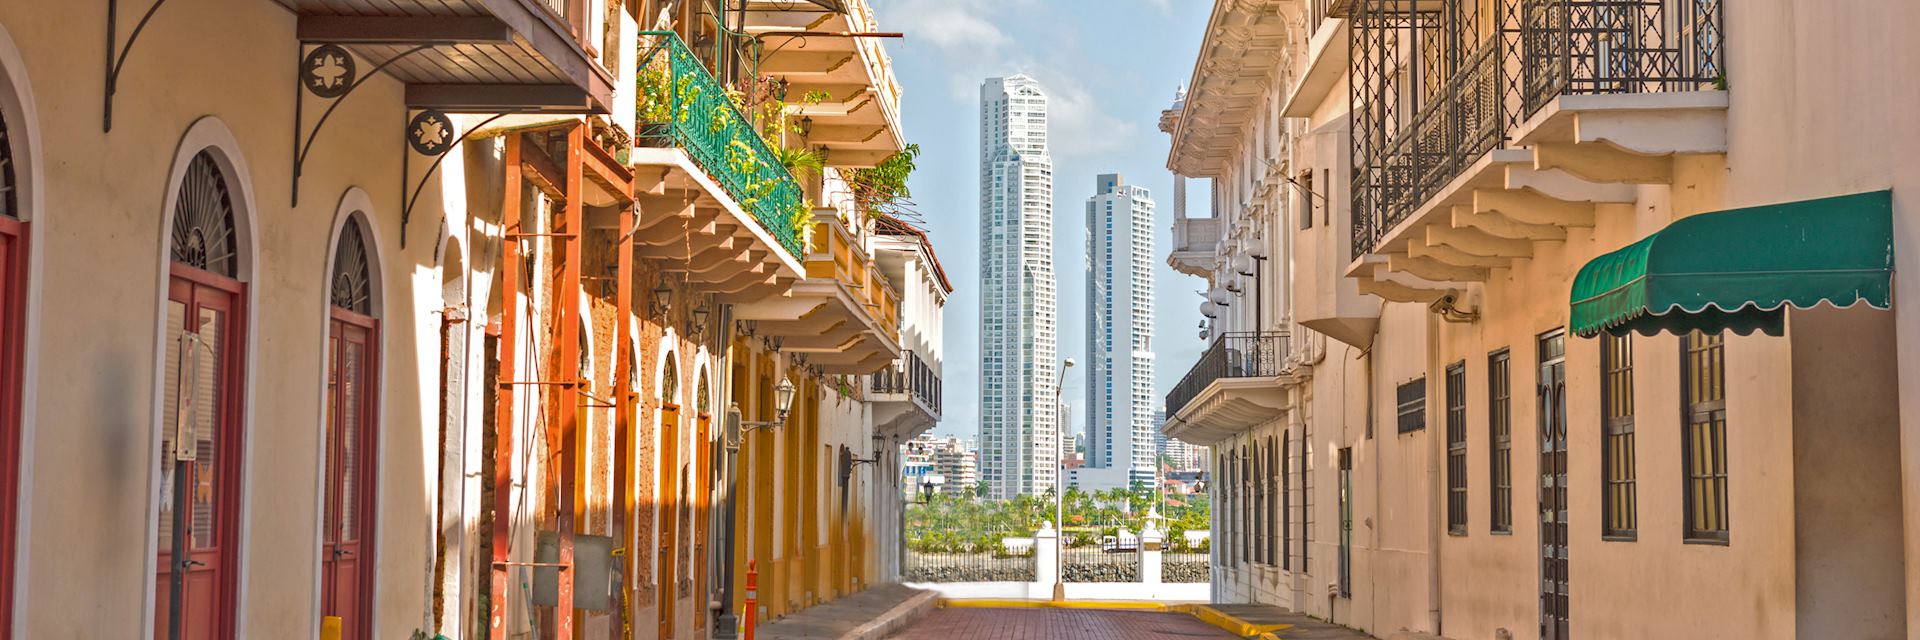 Visit Panama City on a trip to Panama | Audley Travel US